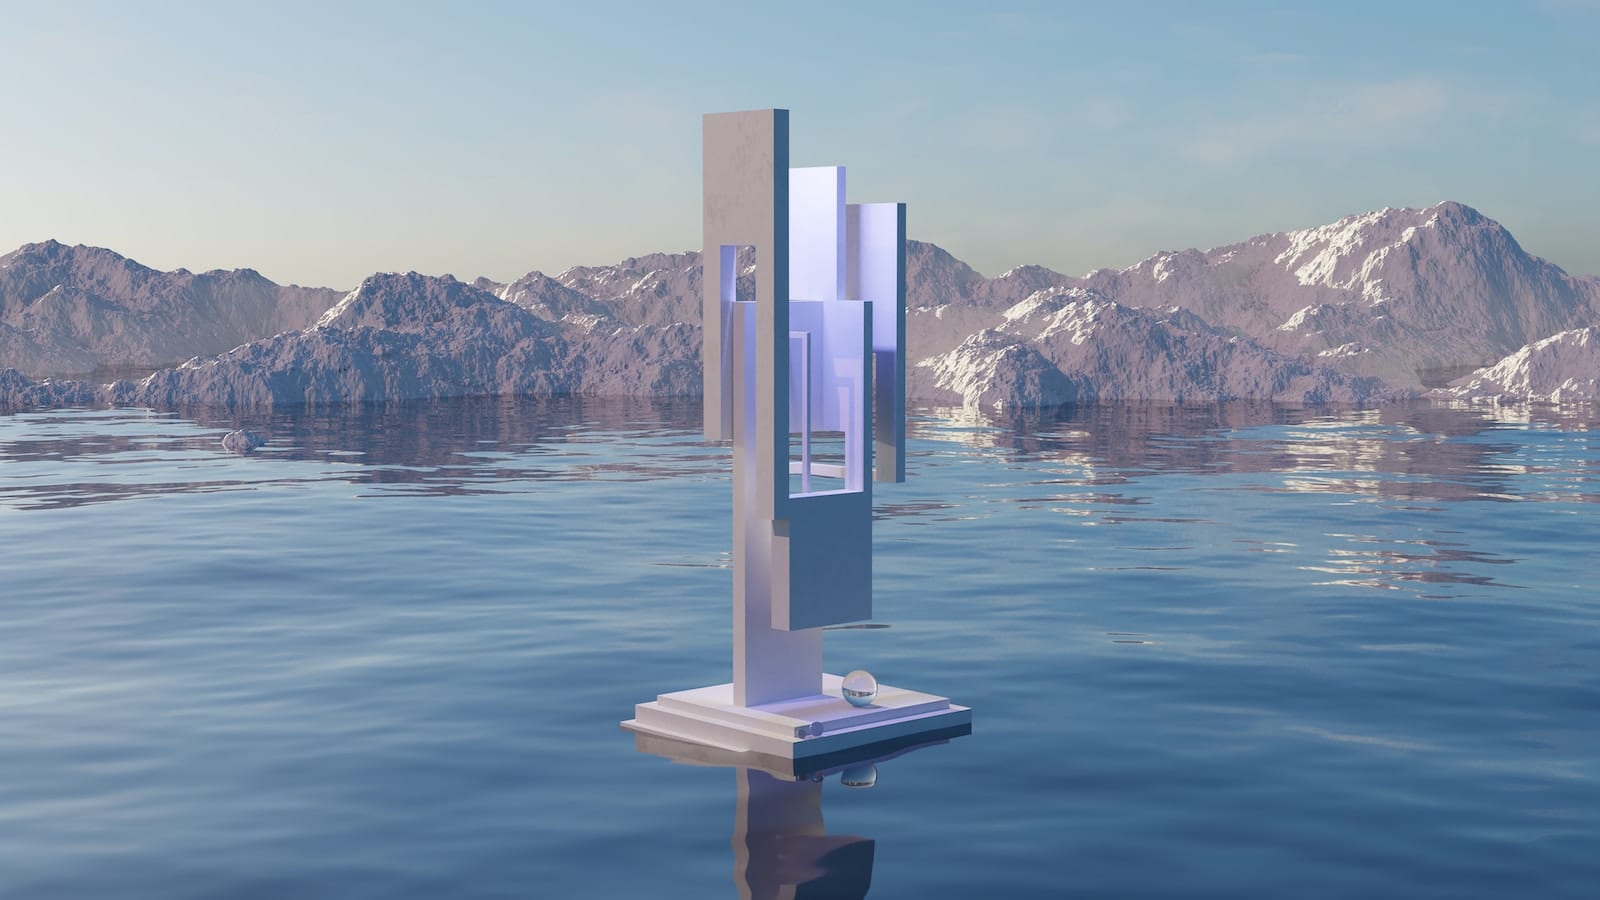 a computer generated image of a computer tower in the water